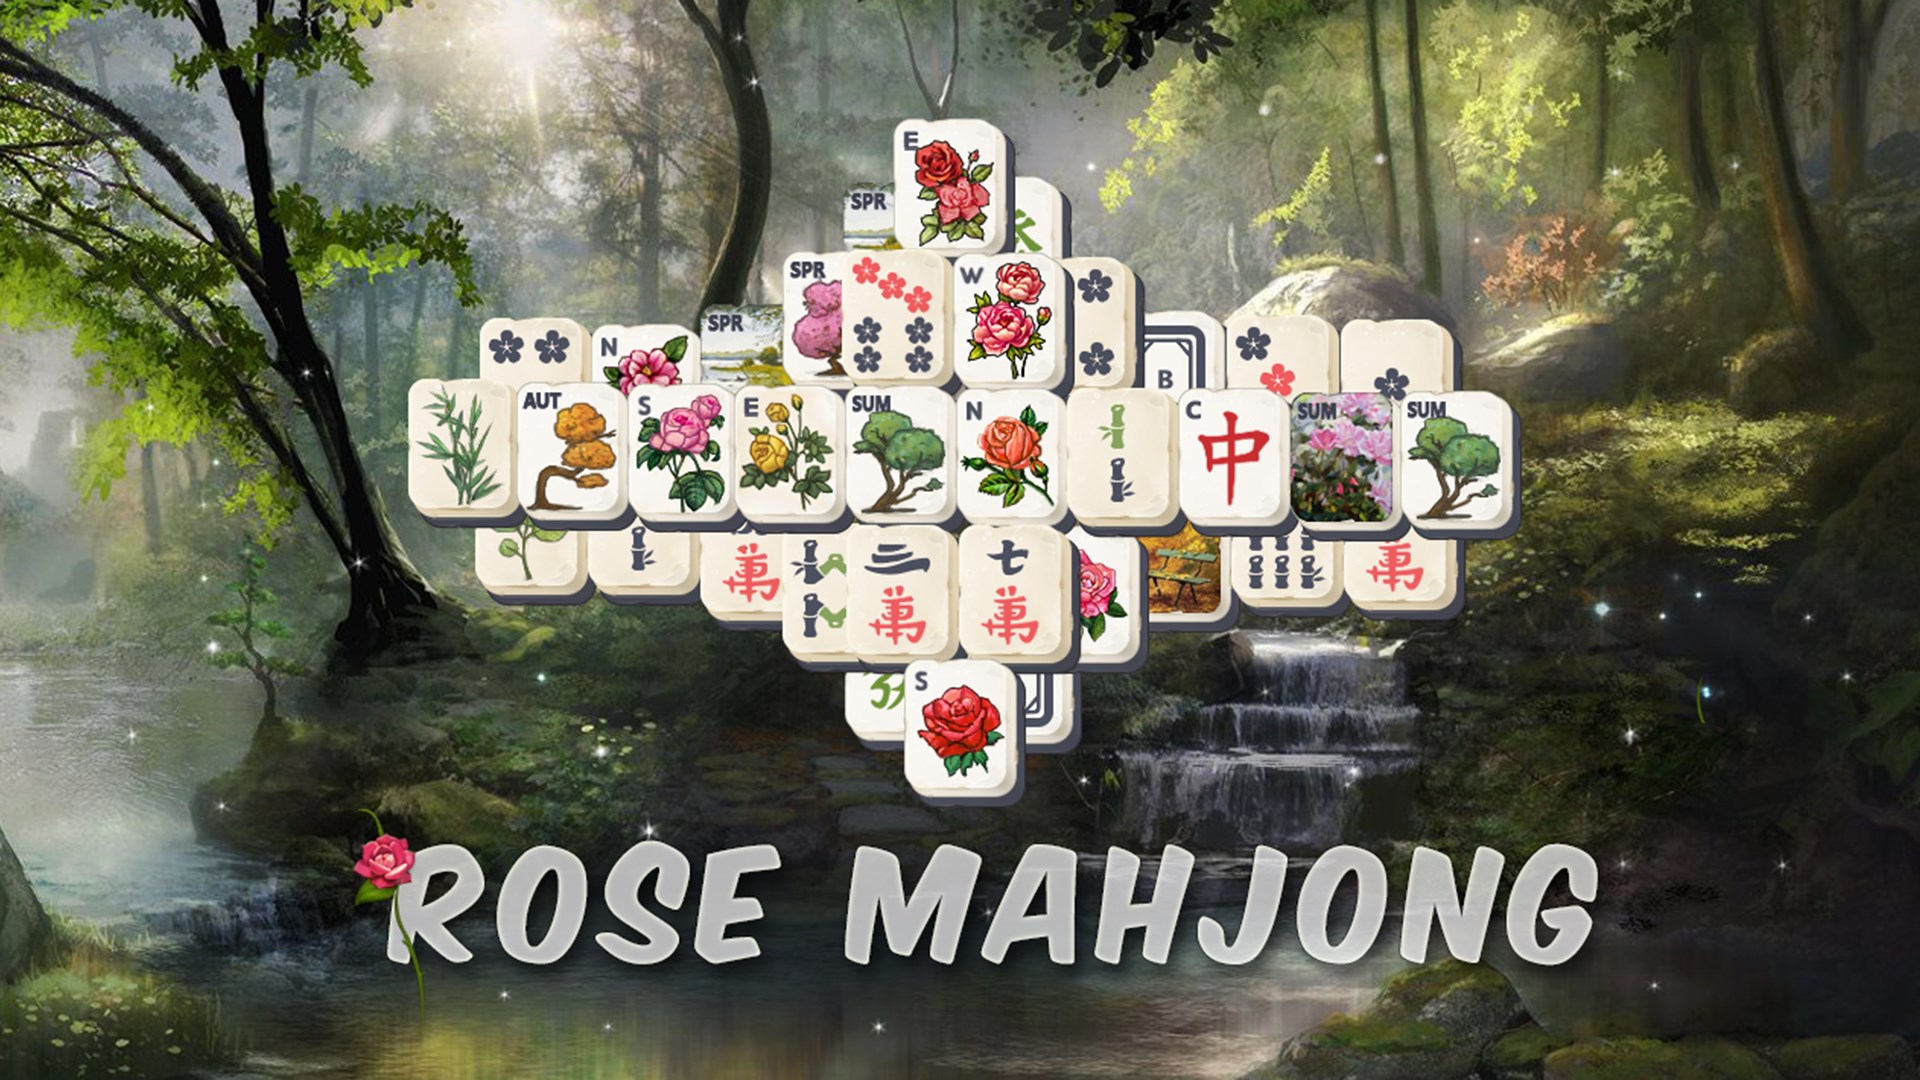 Get Mahjong Solitaire (Free) - Microsoft Store